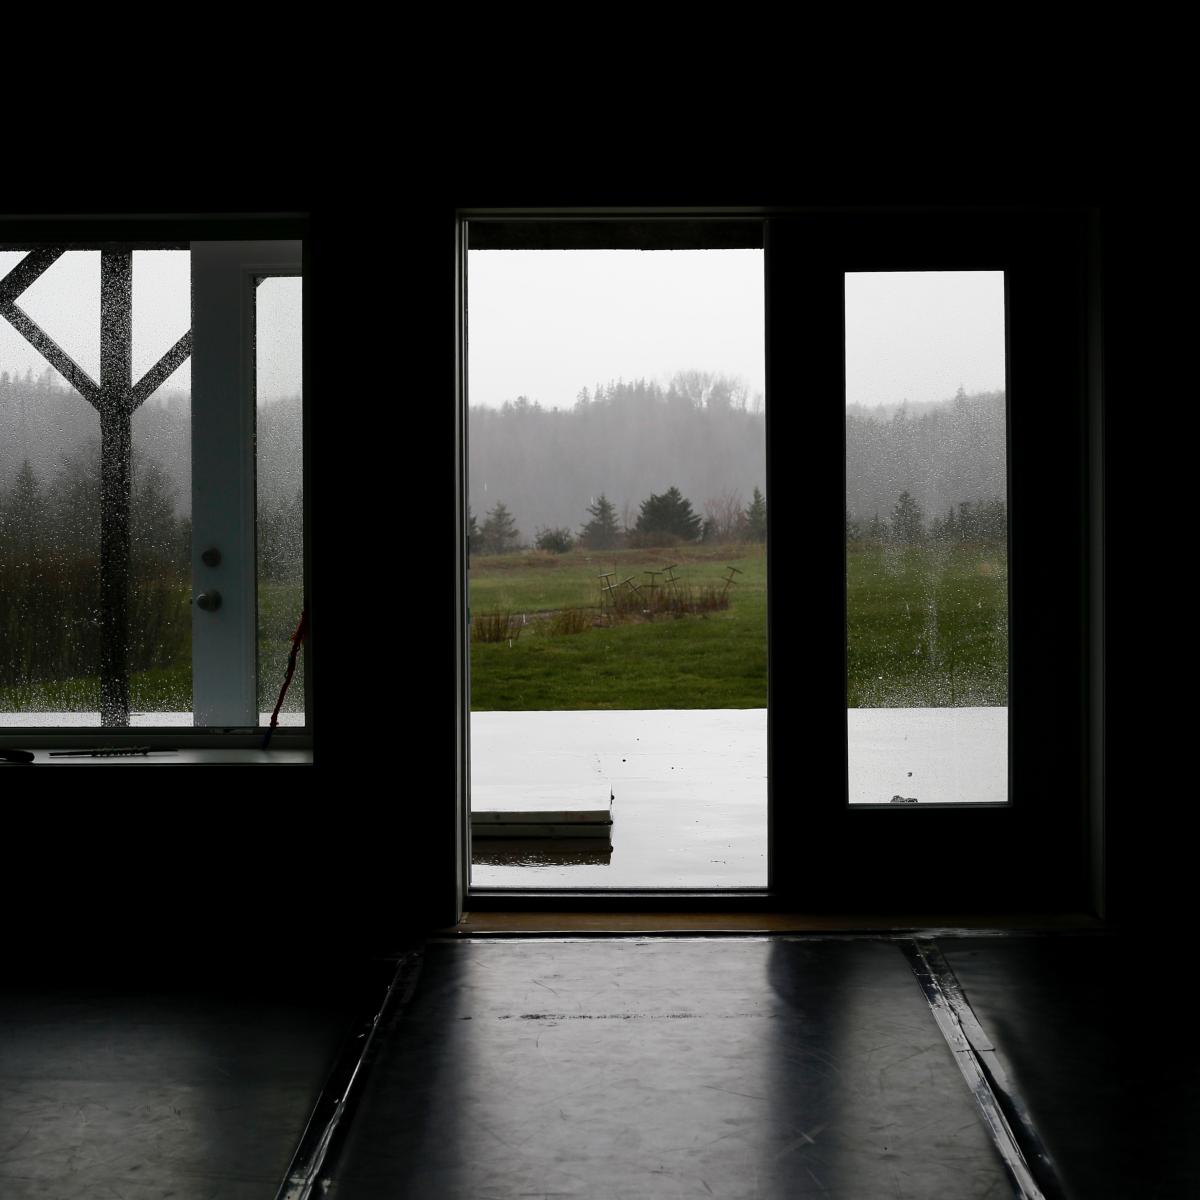  A dark room with an open door and windows showing a rainy landscape